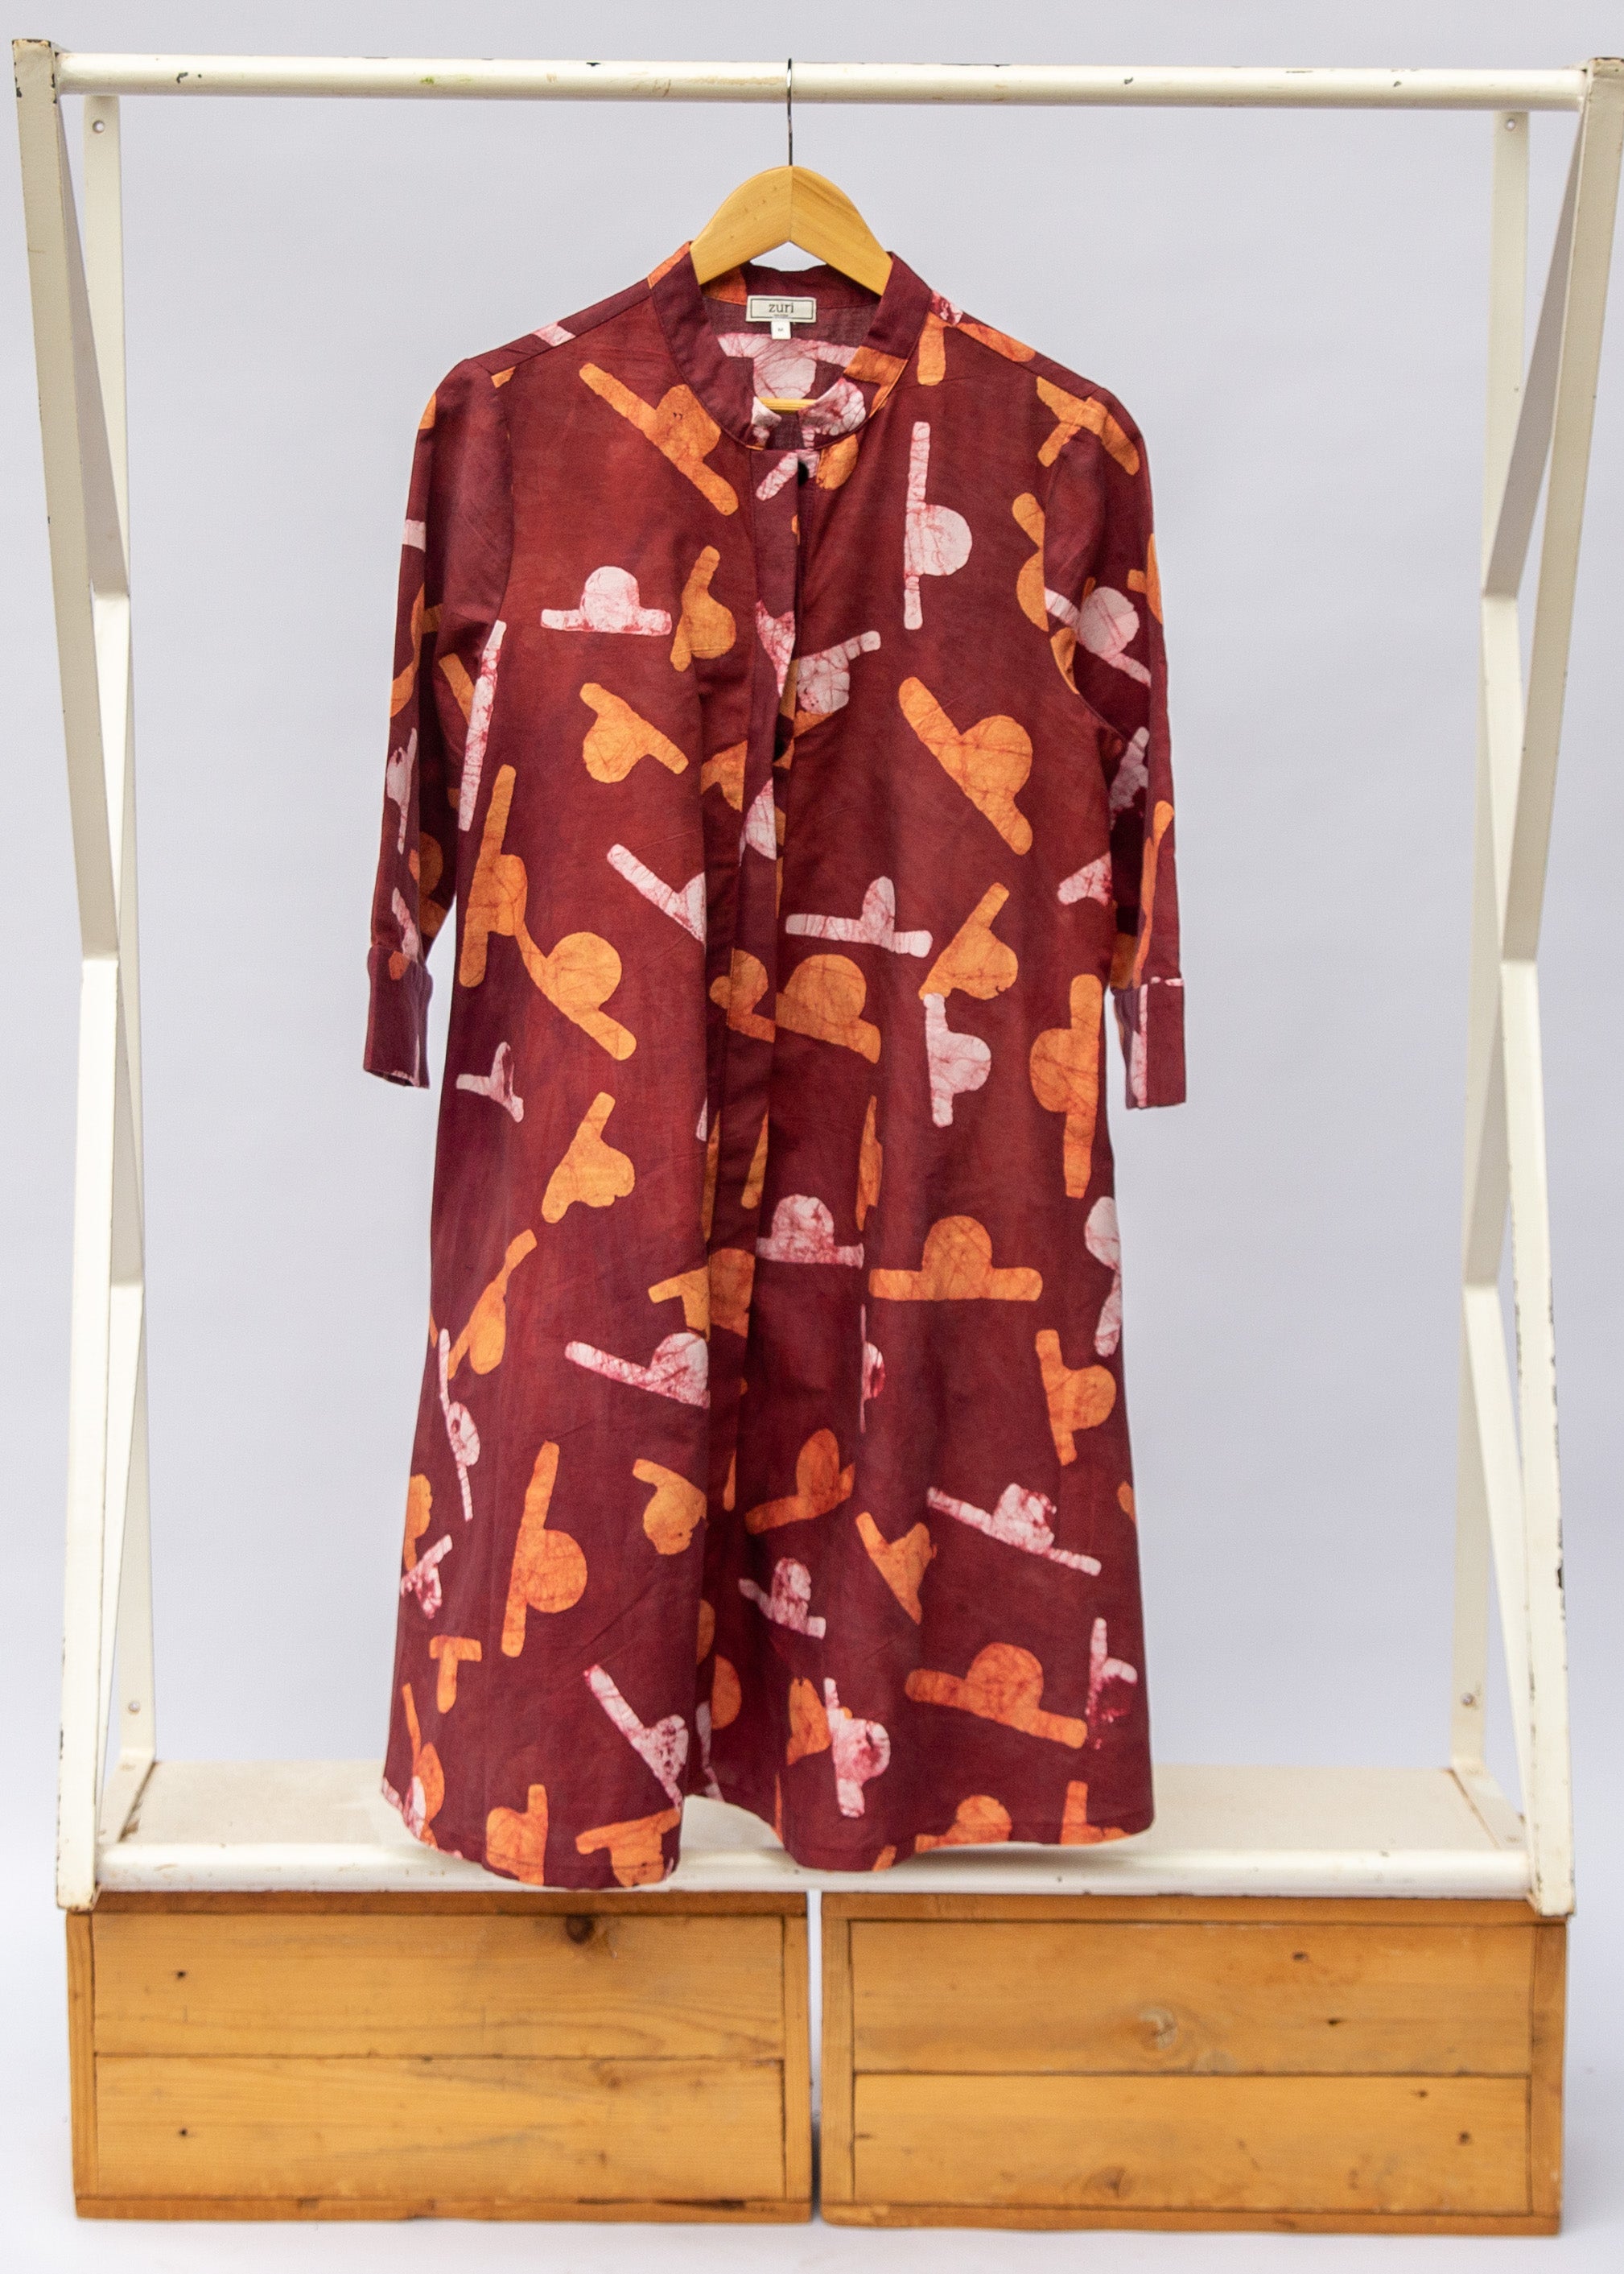 Maroon dress with abstract white and orange shapes